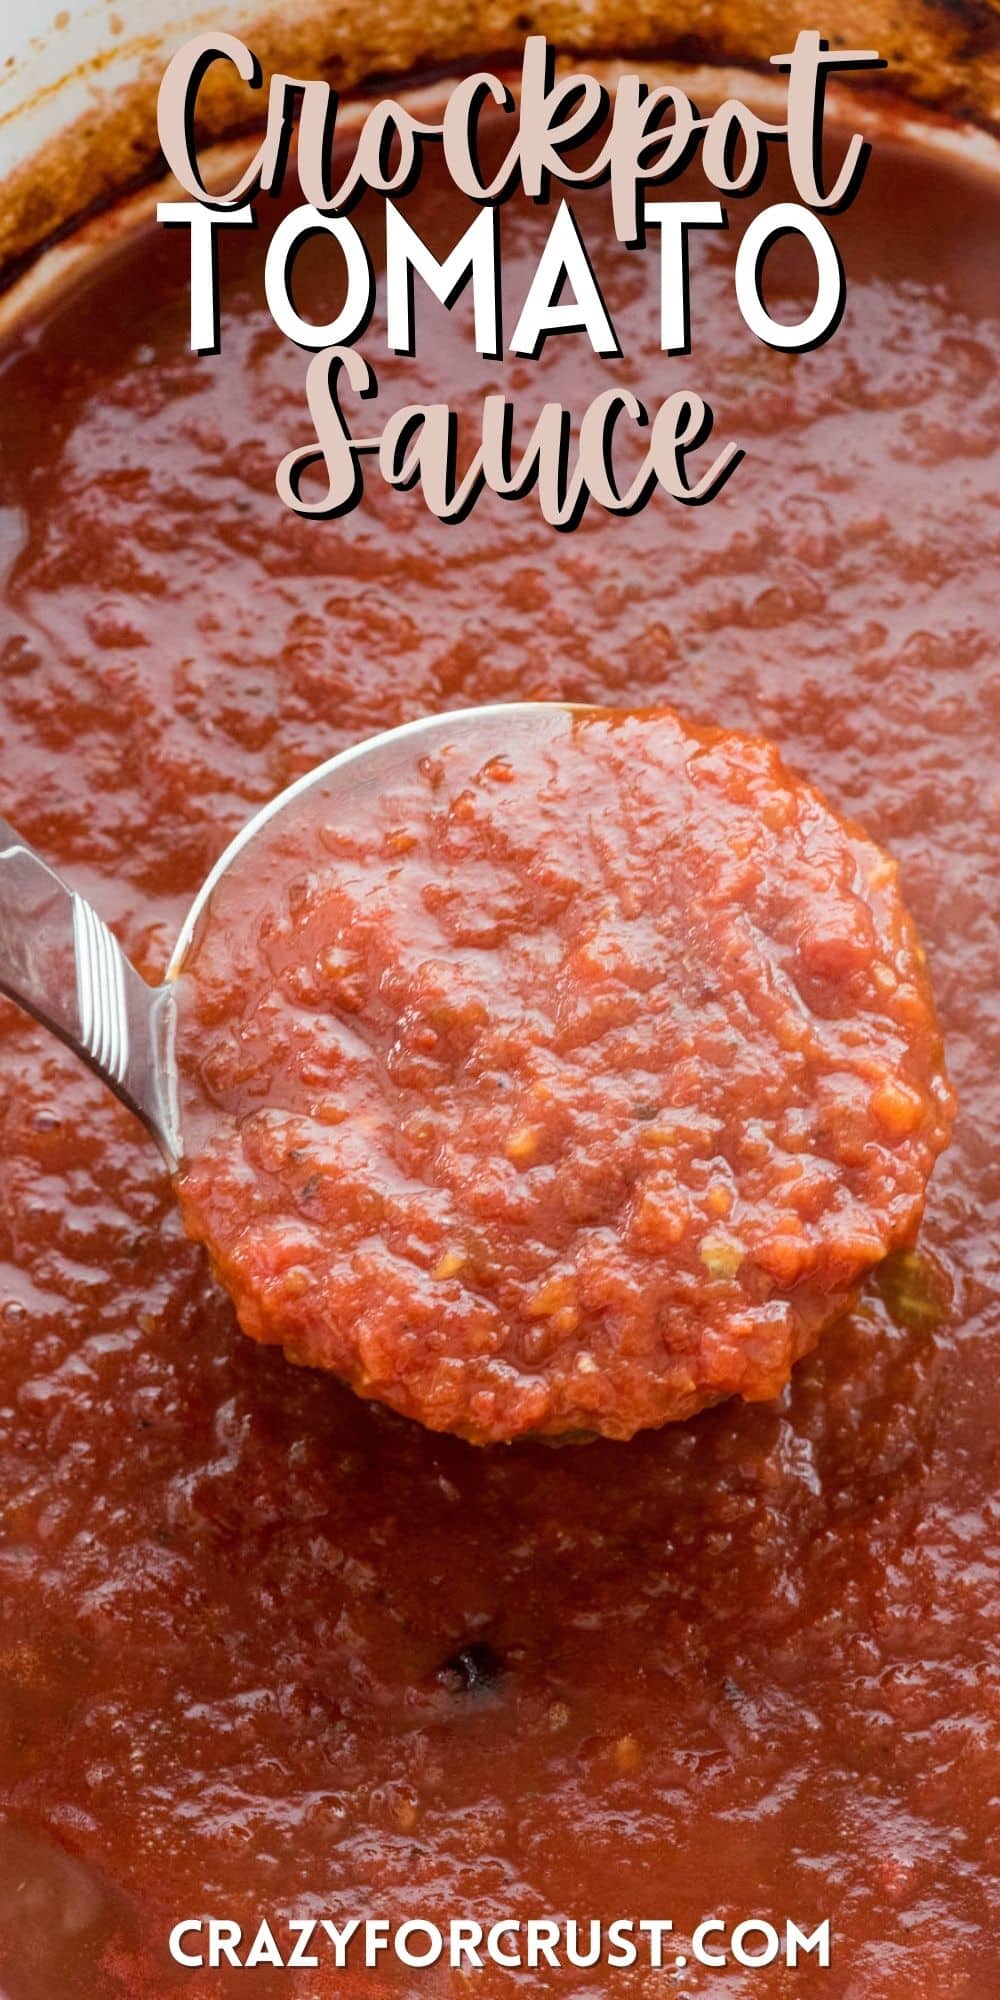 tomato sauce in the crockpot with a latel scooping some up with words on the image.